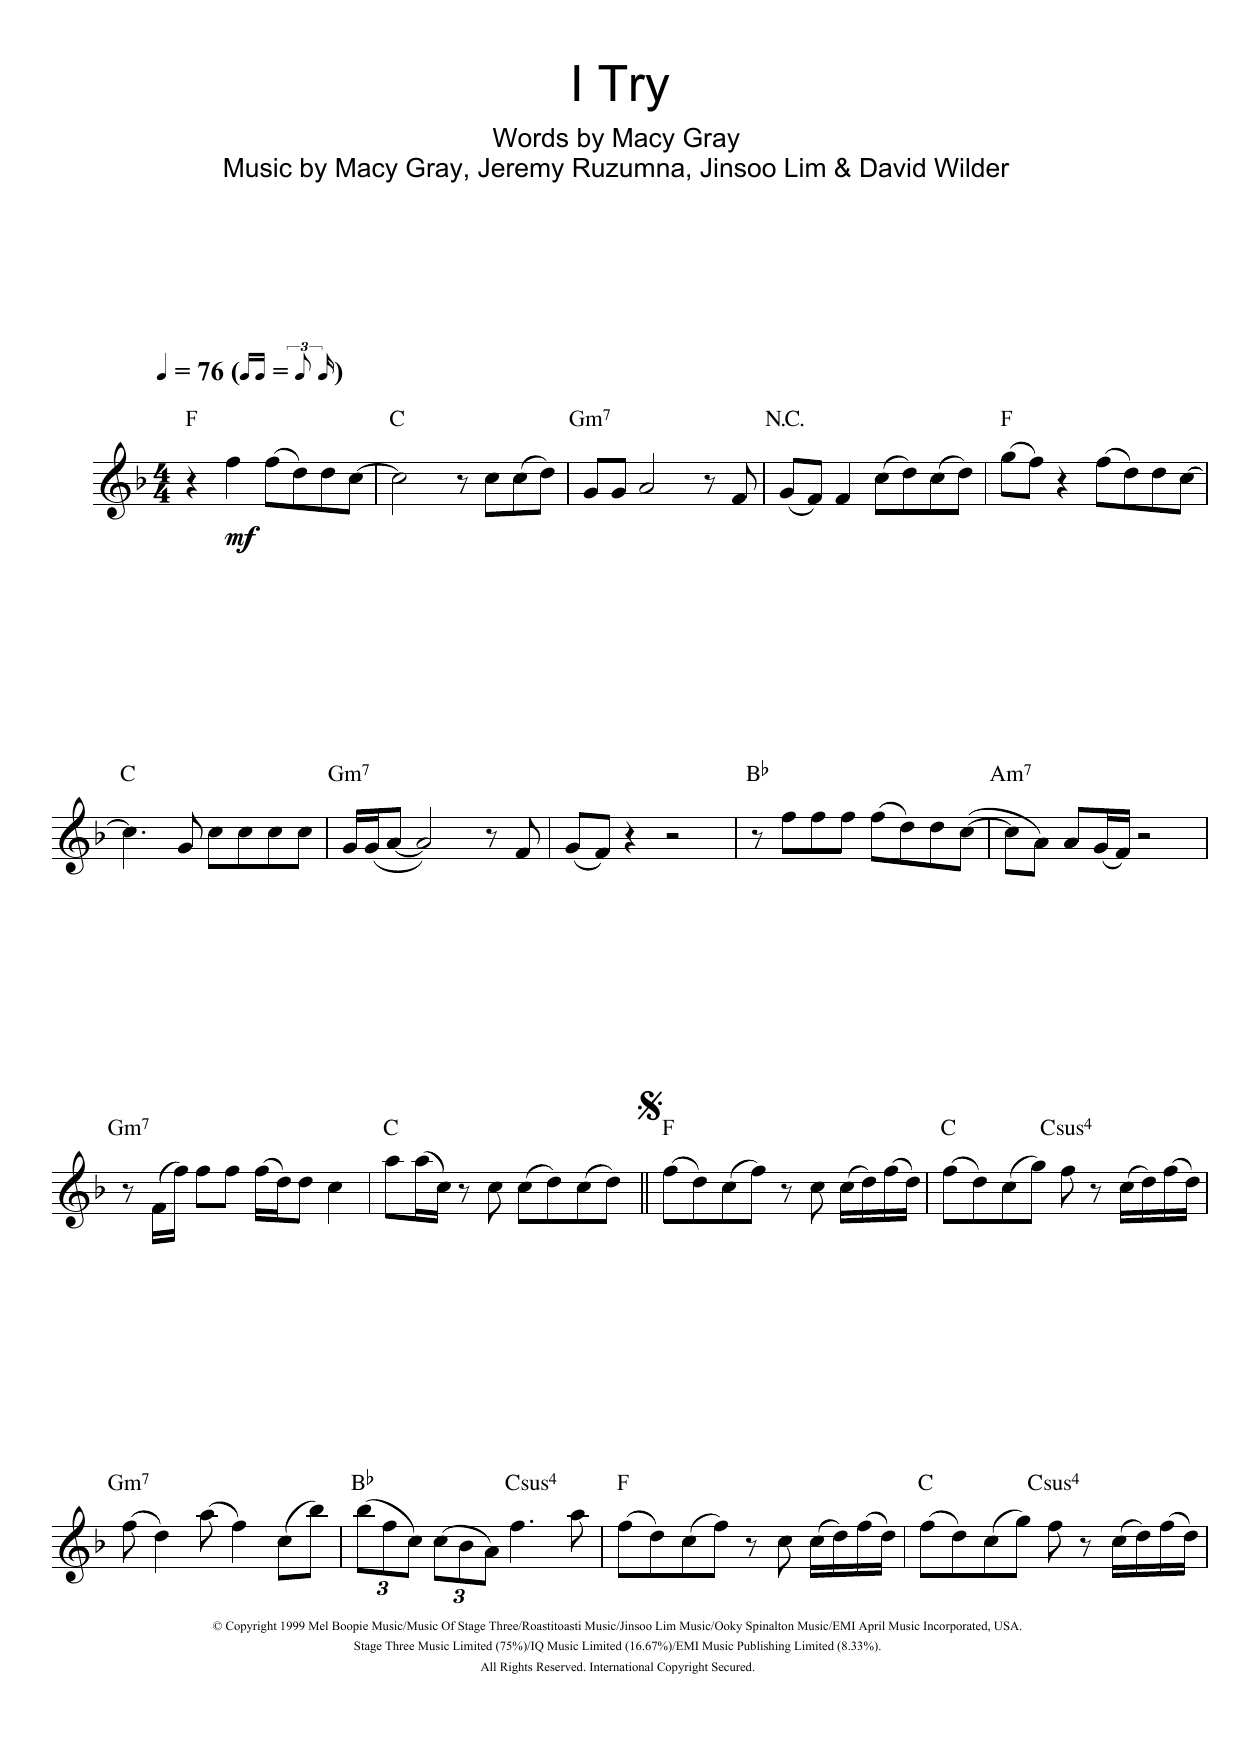 Download Macy Gray I Try Sheet Music